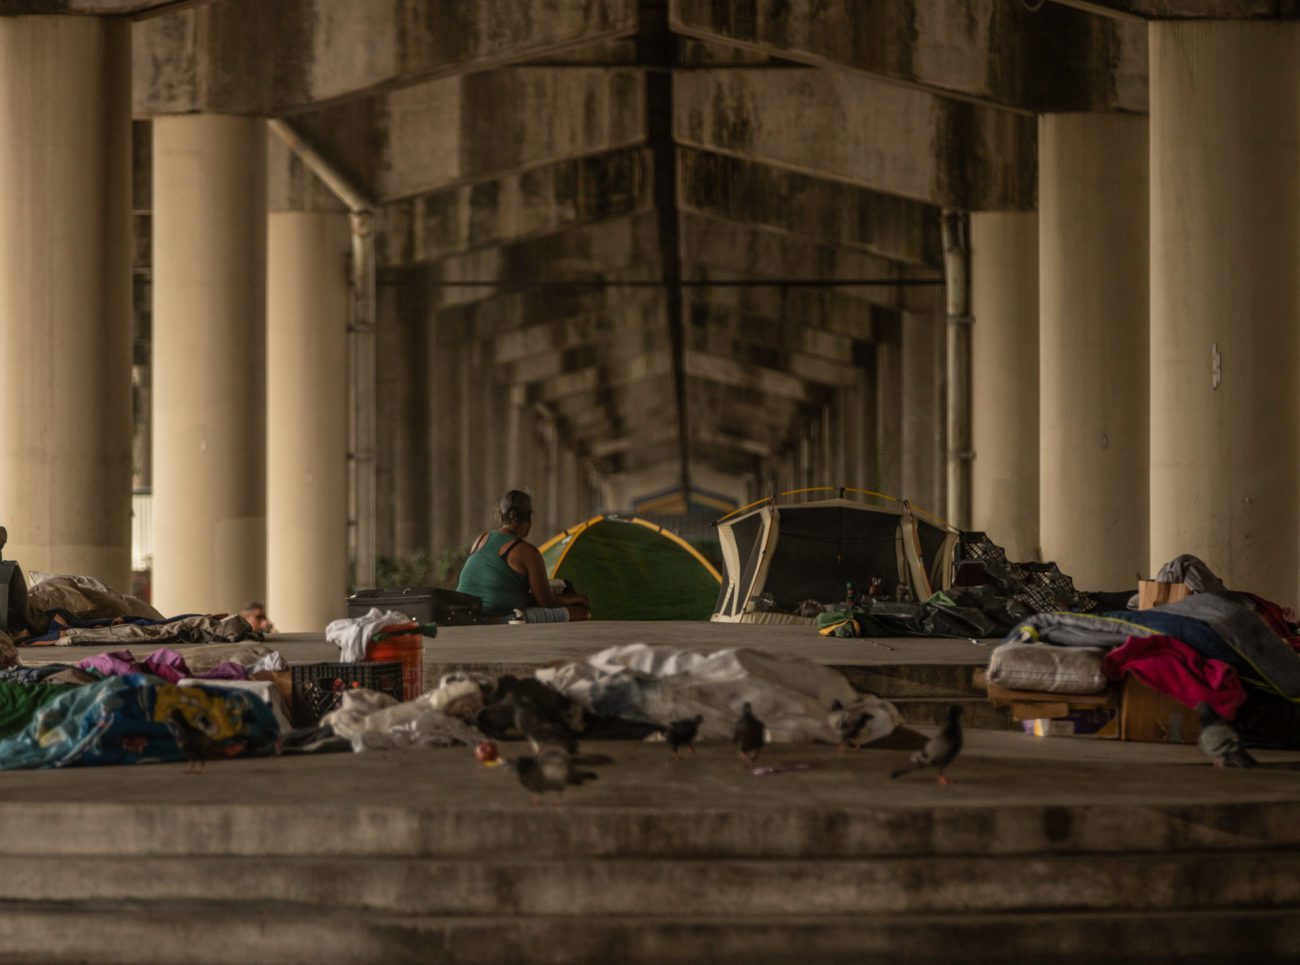 City of Dallas' Efforts to Address Homelessness and Vagrancy Criticized